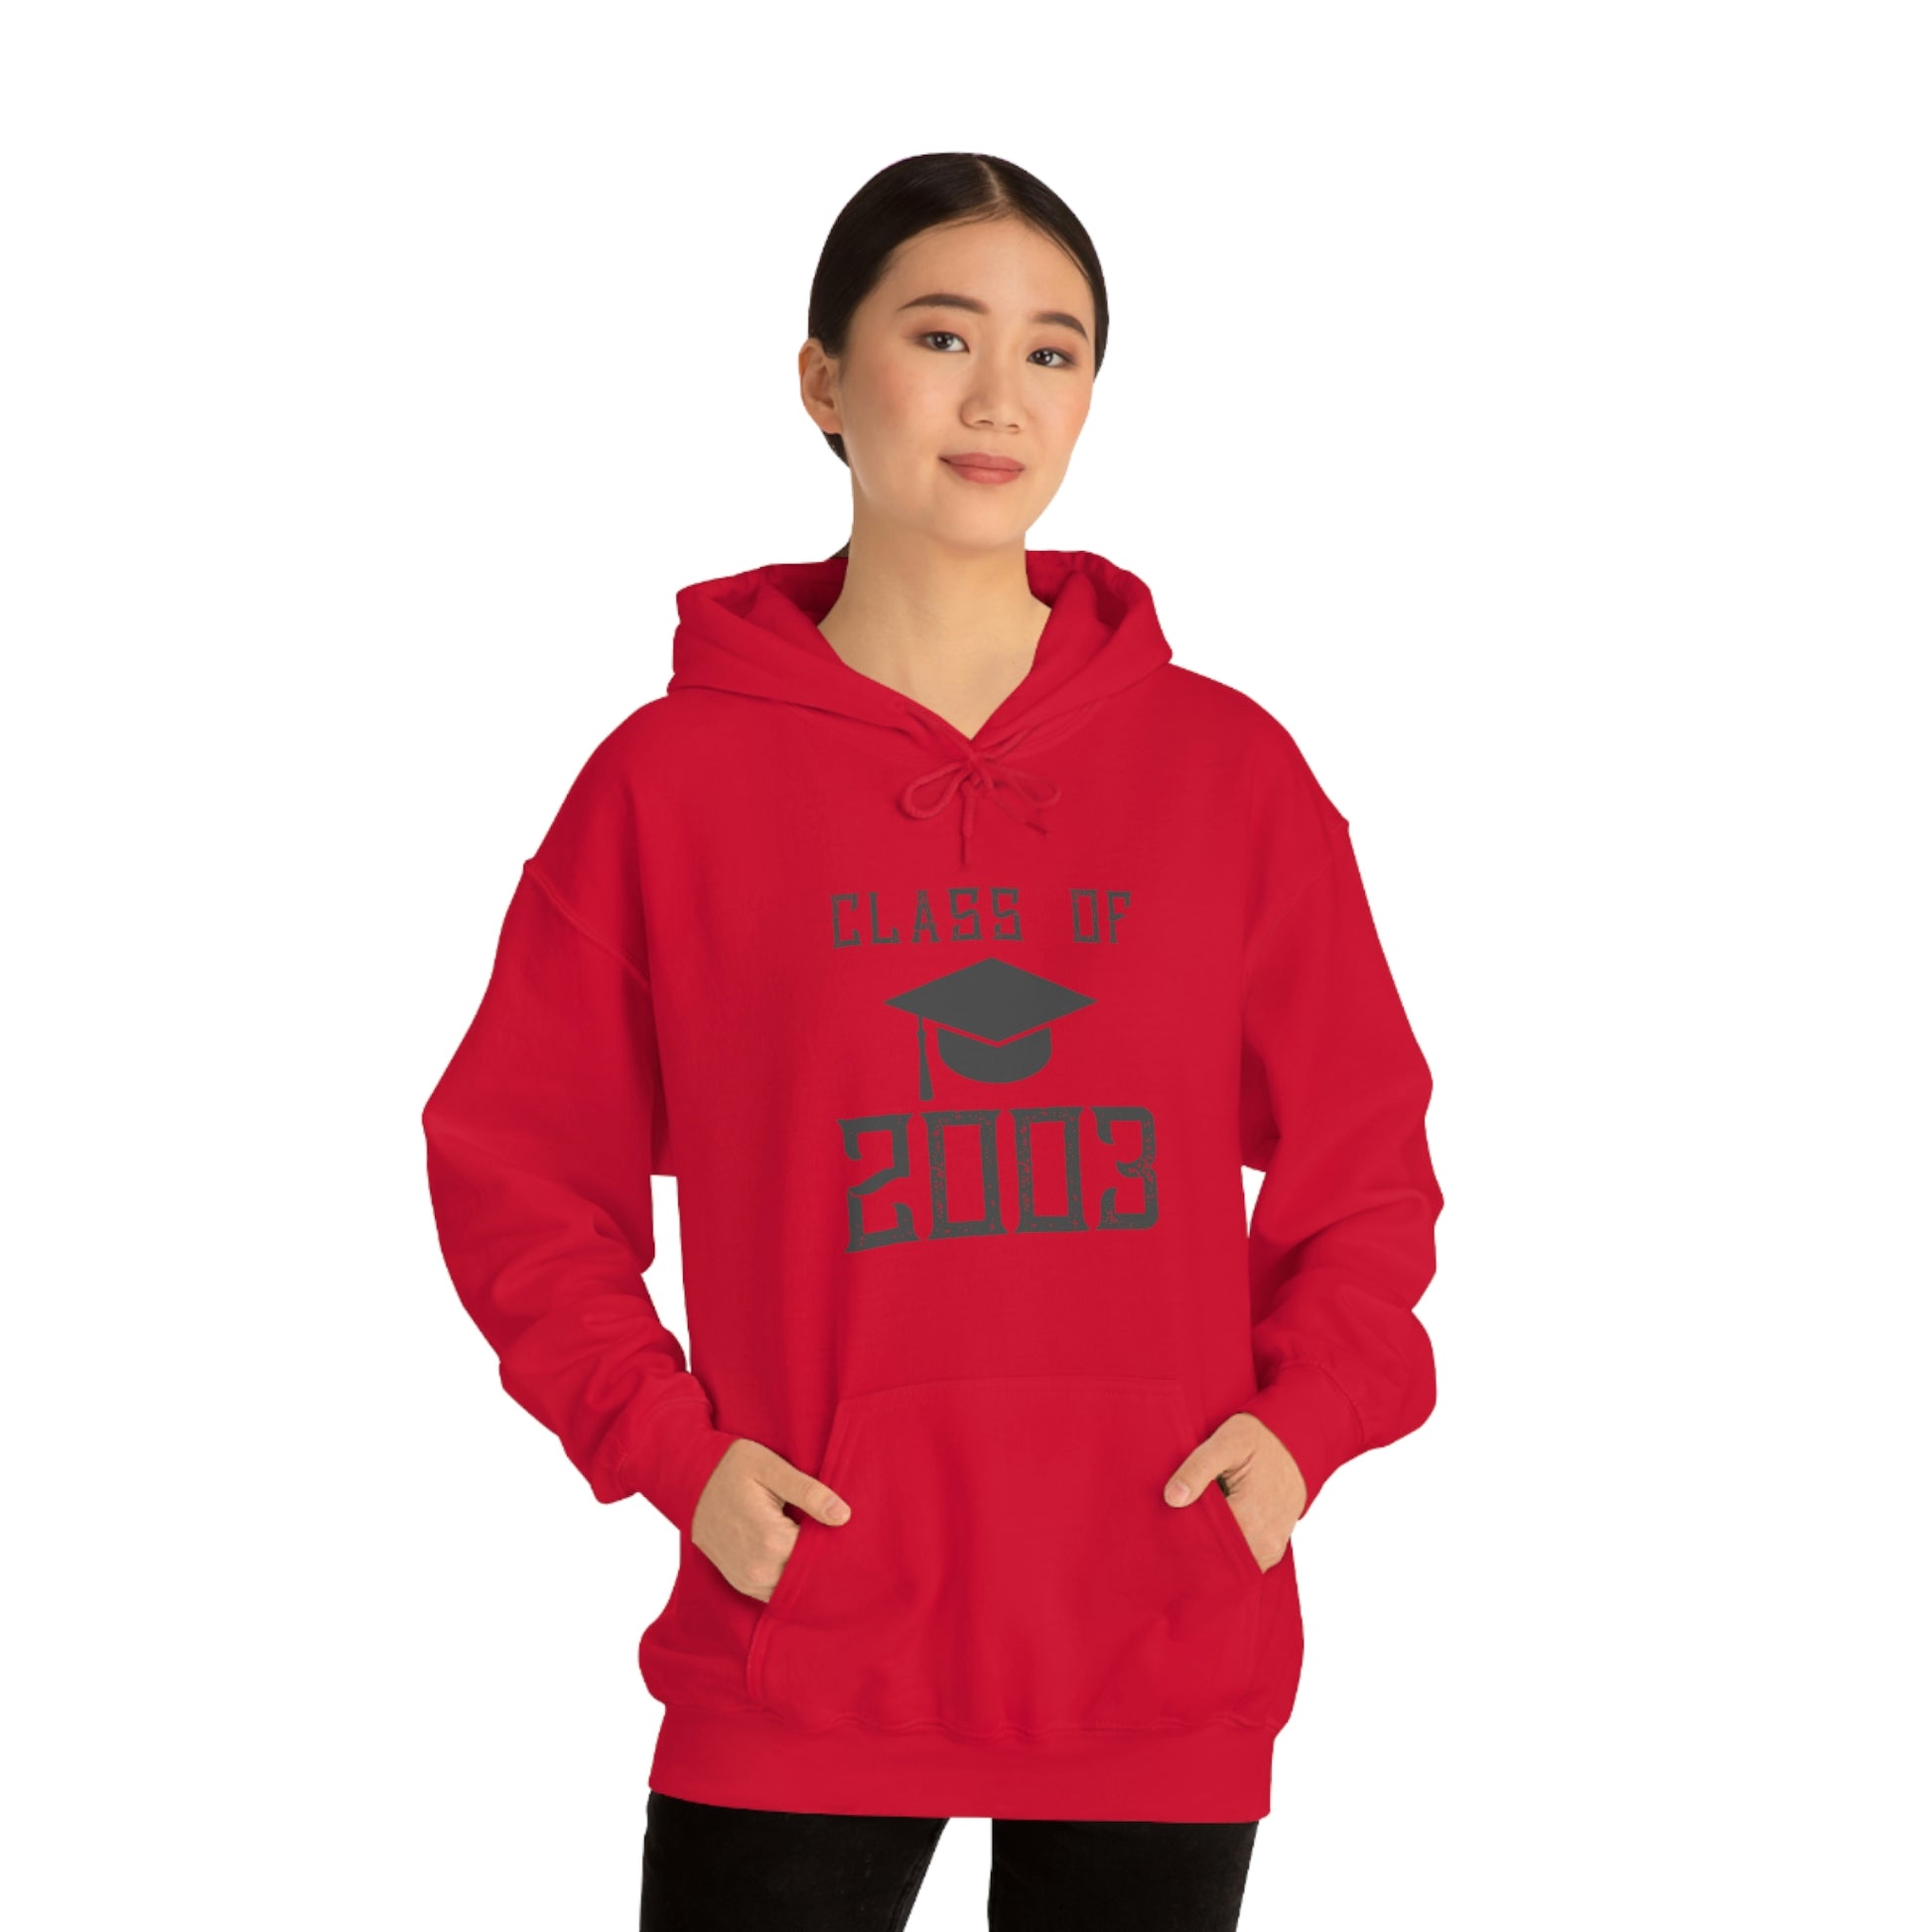 "Class Of 2003" Hoodie - Weave Got Gifts - Unique Gifts You Won’t Find Anywhere Else!